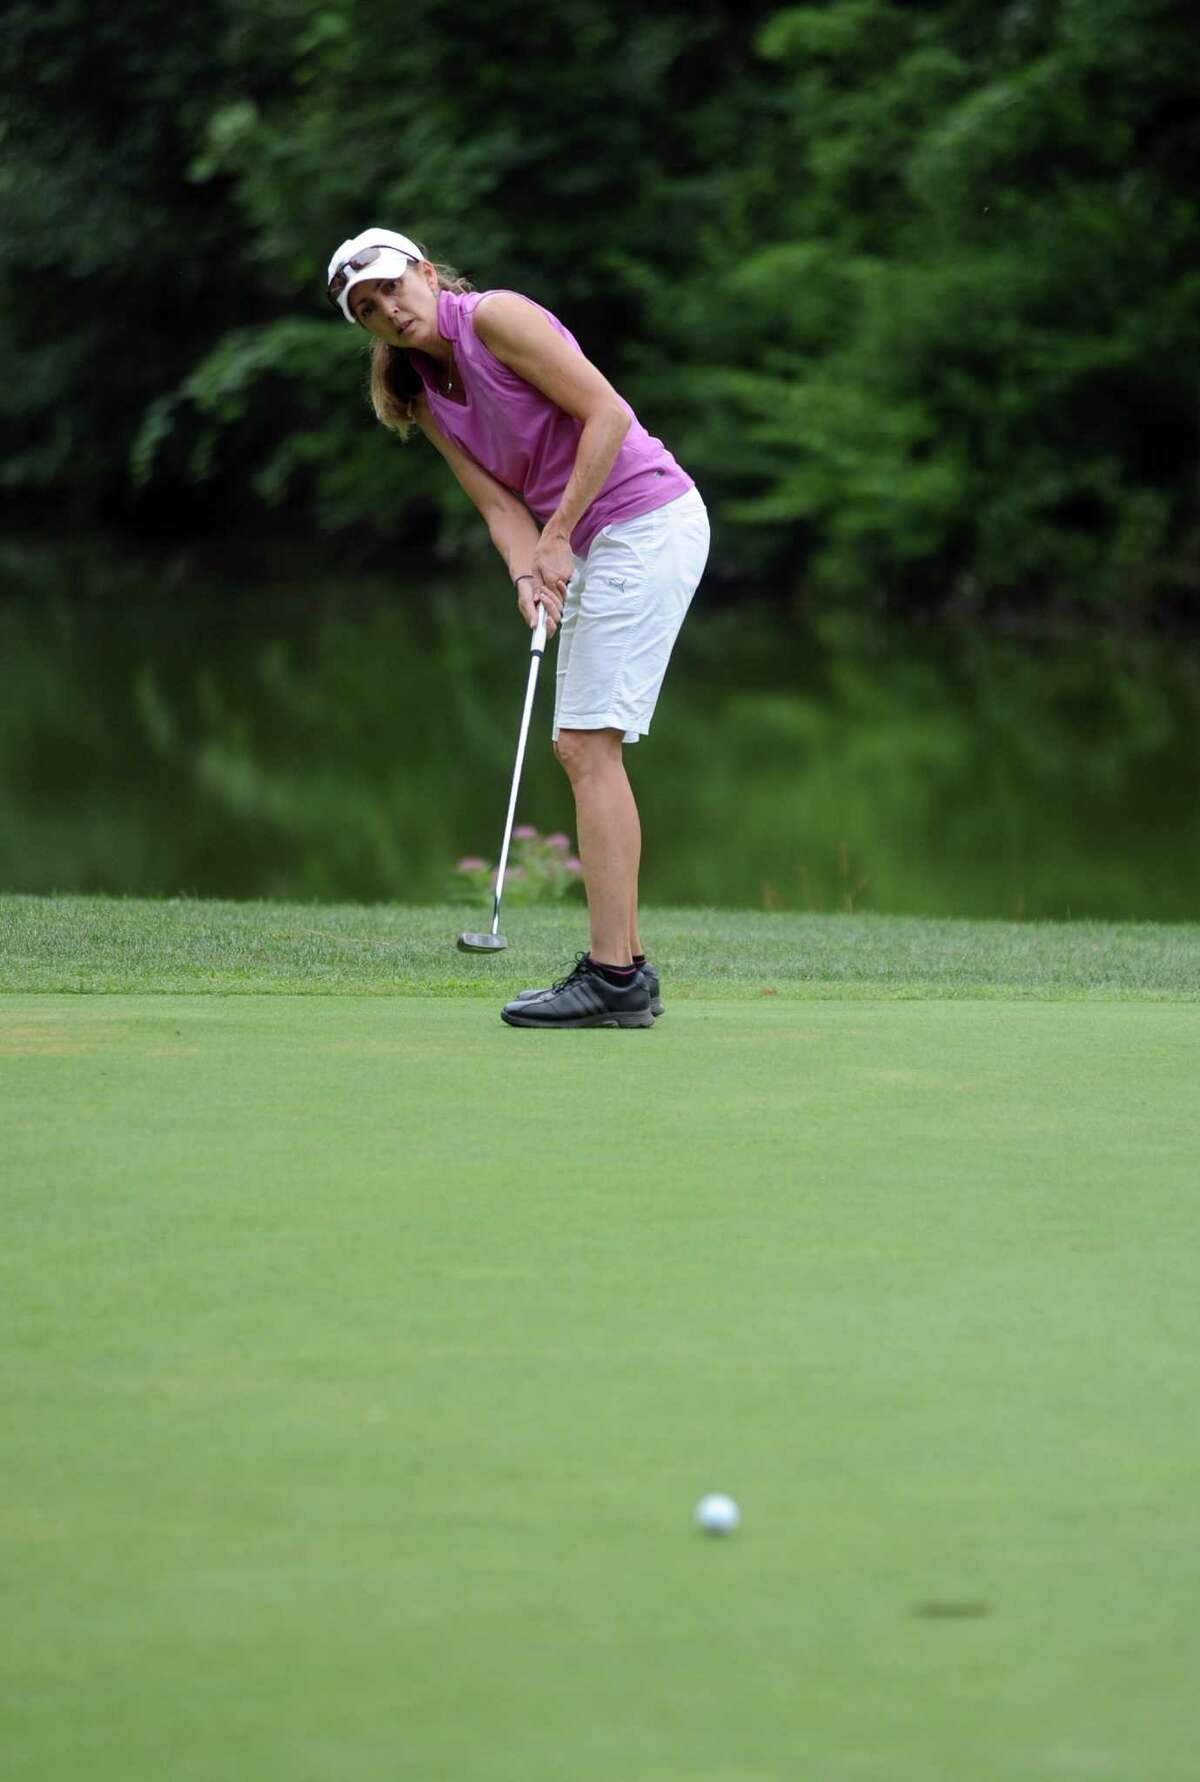 Teresa White makes a long putt as she plays in the 2012 Stamford Amateur Golf Championship at E.G. Brennan golf course on Saturday, July 28, 2012.